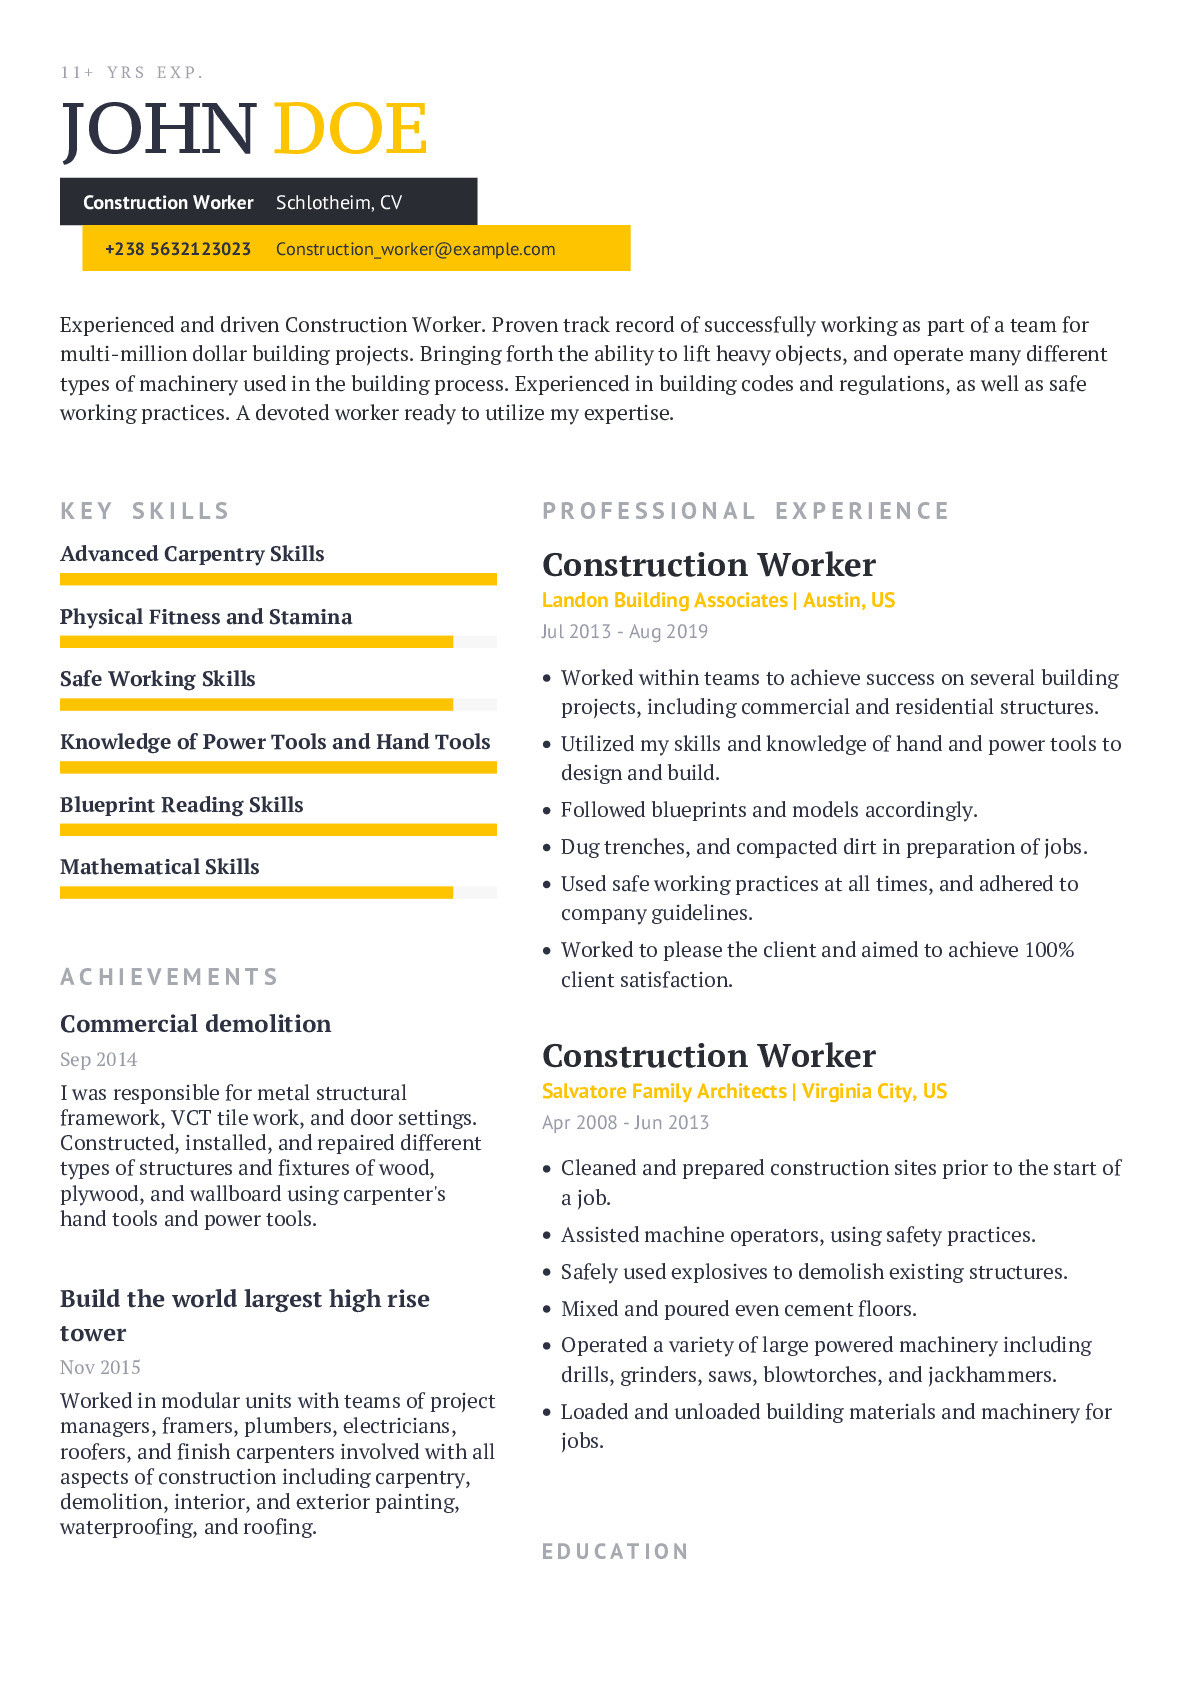 Construction Worker Resume Examples and Samples Construction Worker Resume Example with Content Sample Craftmycv